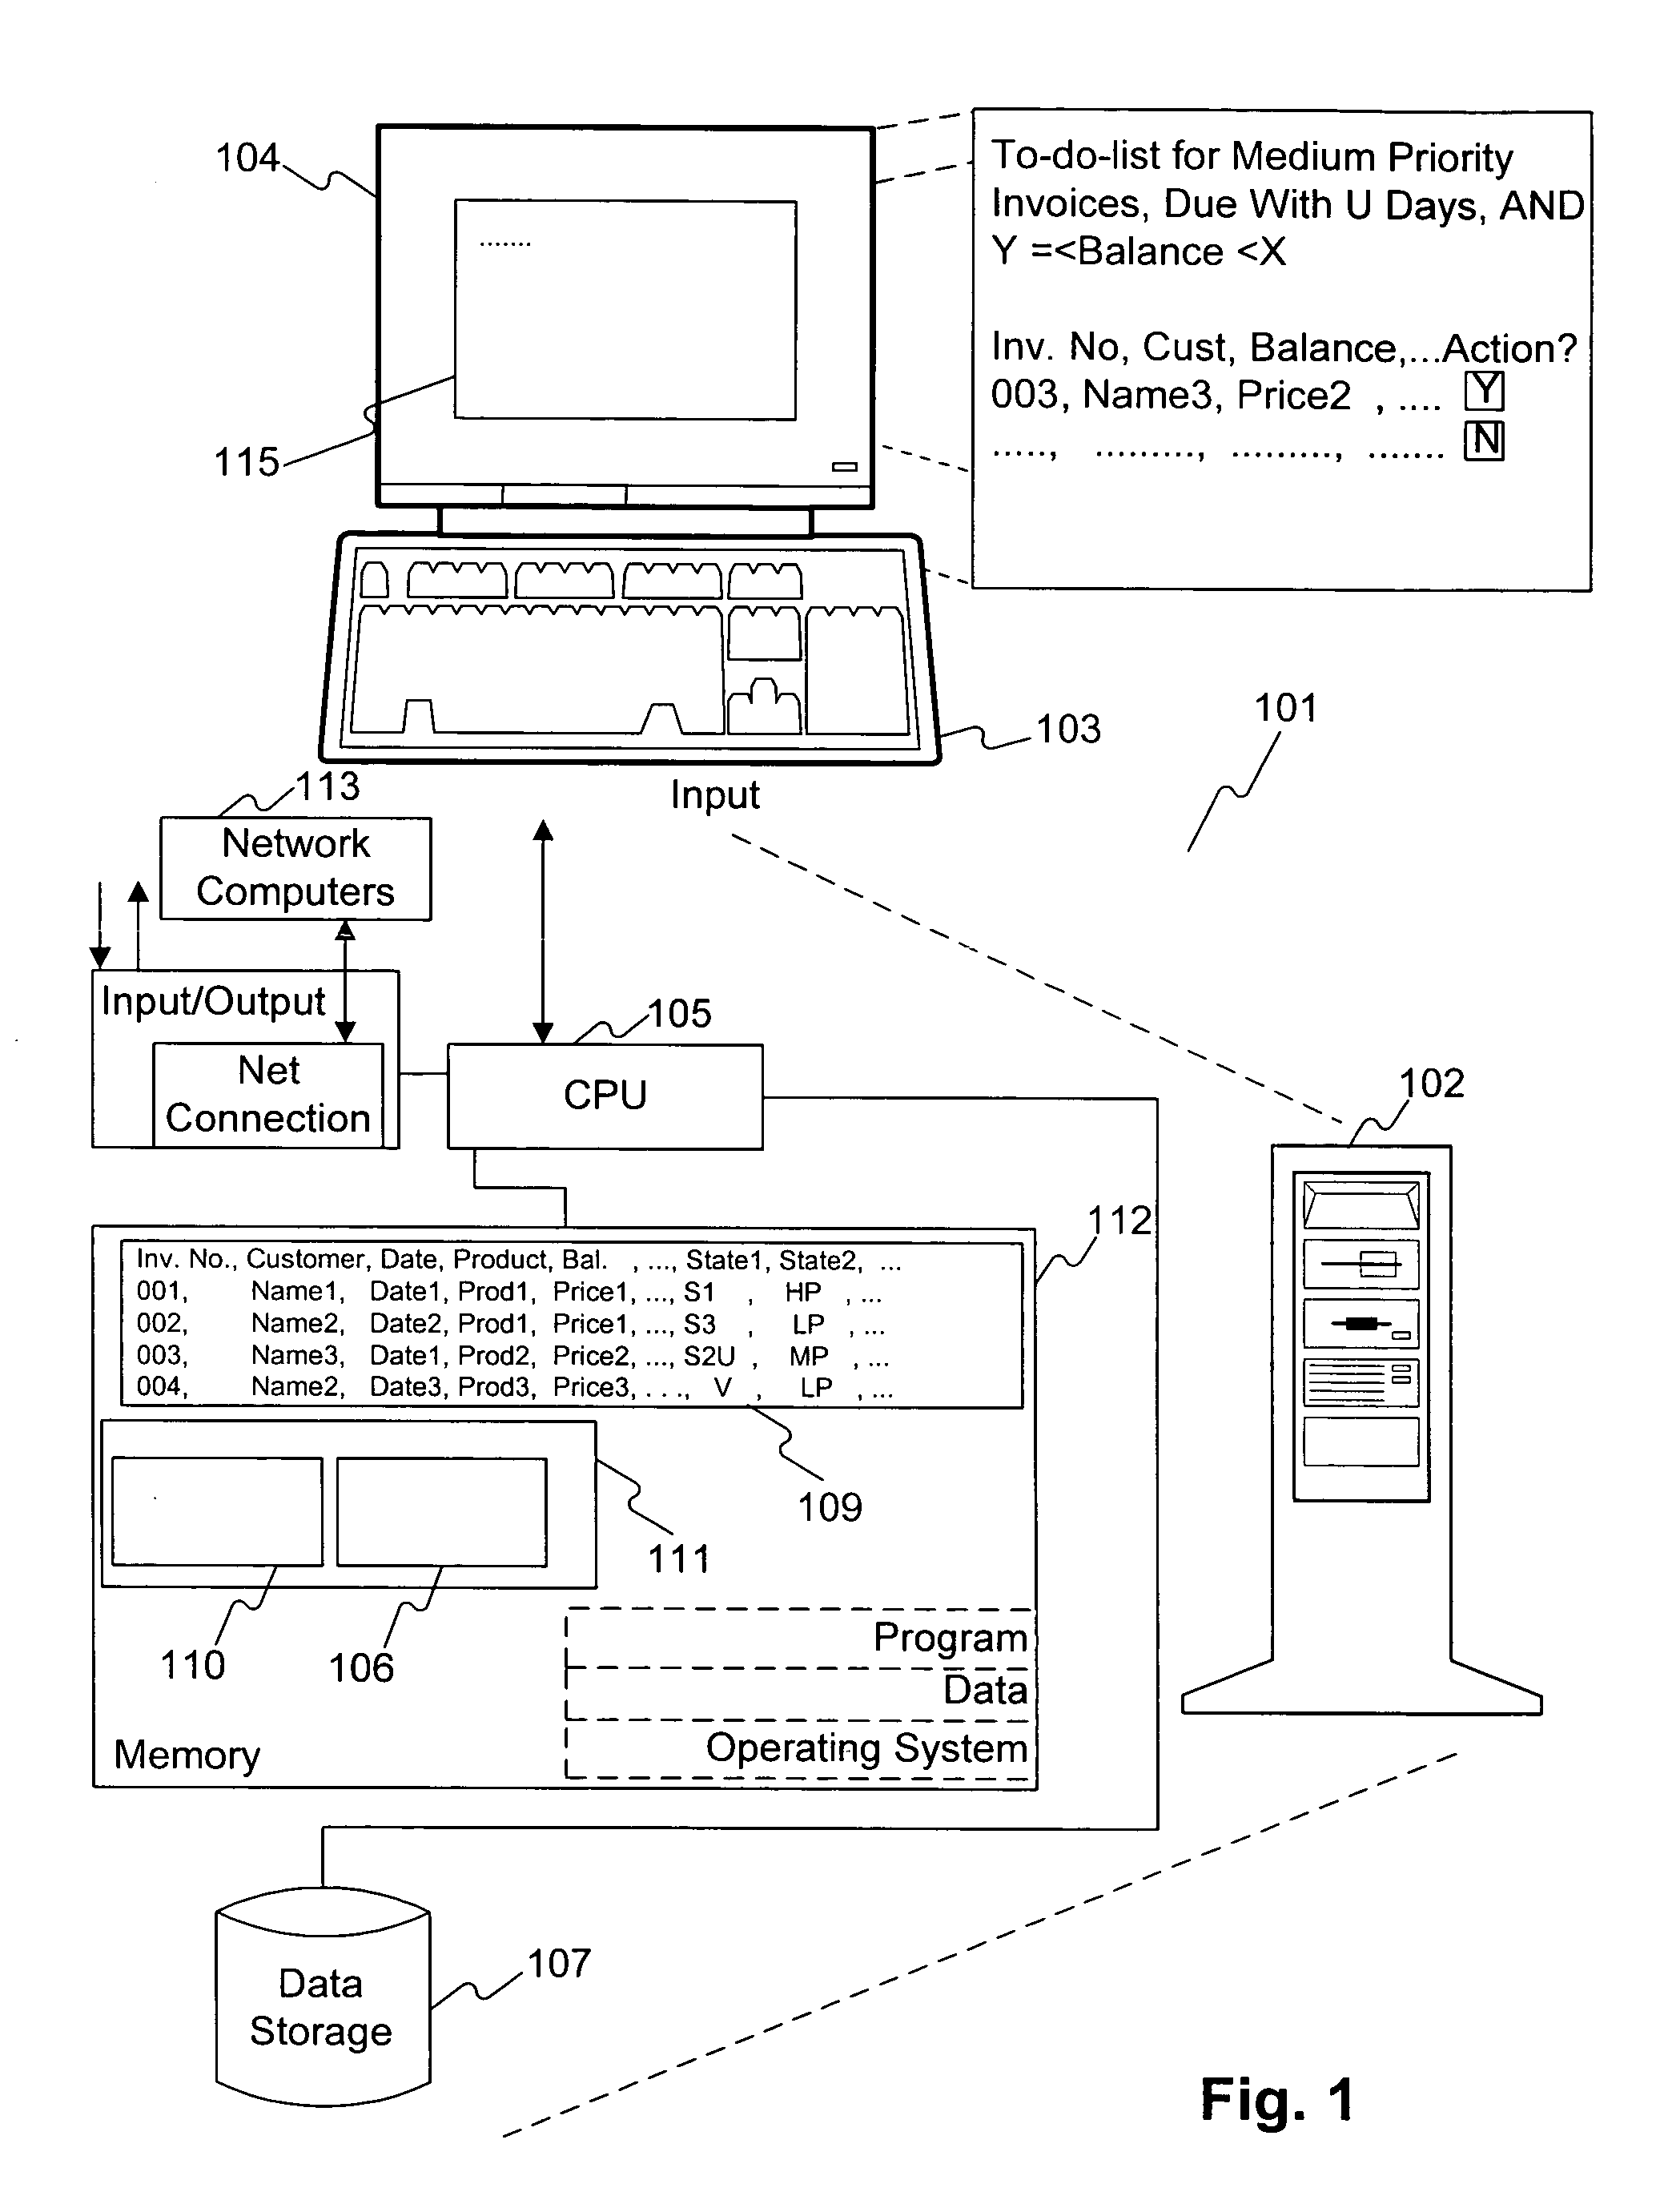 Methods and software applications for computer-aided customer independent cash collection using a state field in a data record